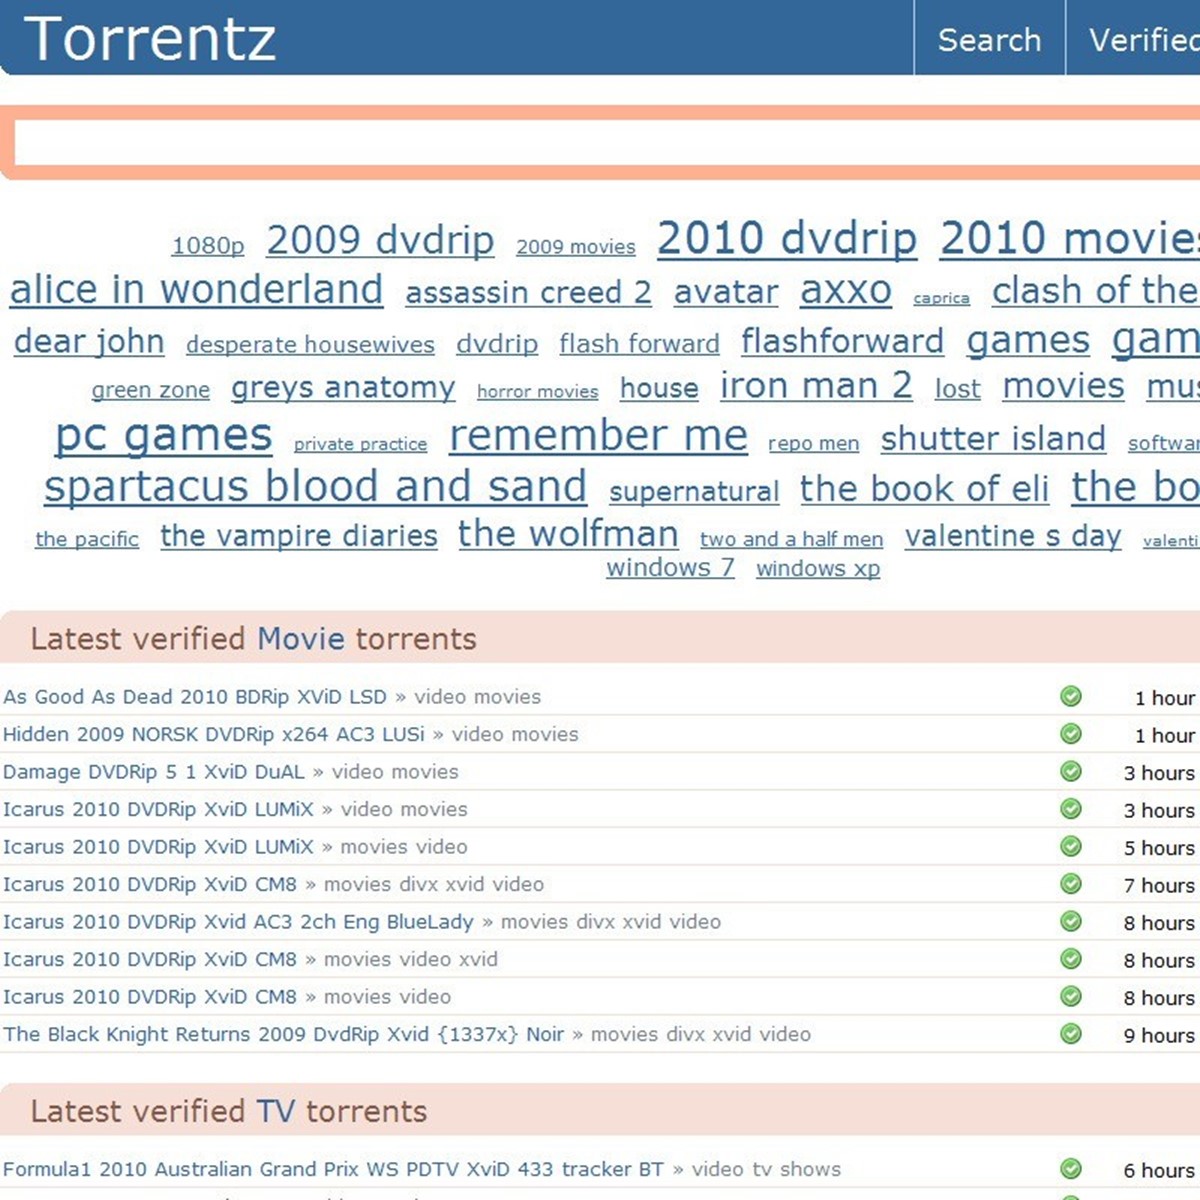 Office For Mac Torrent Download